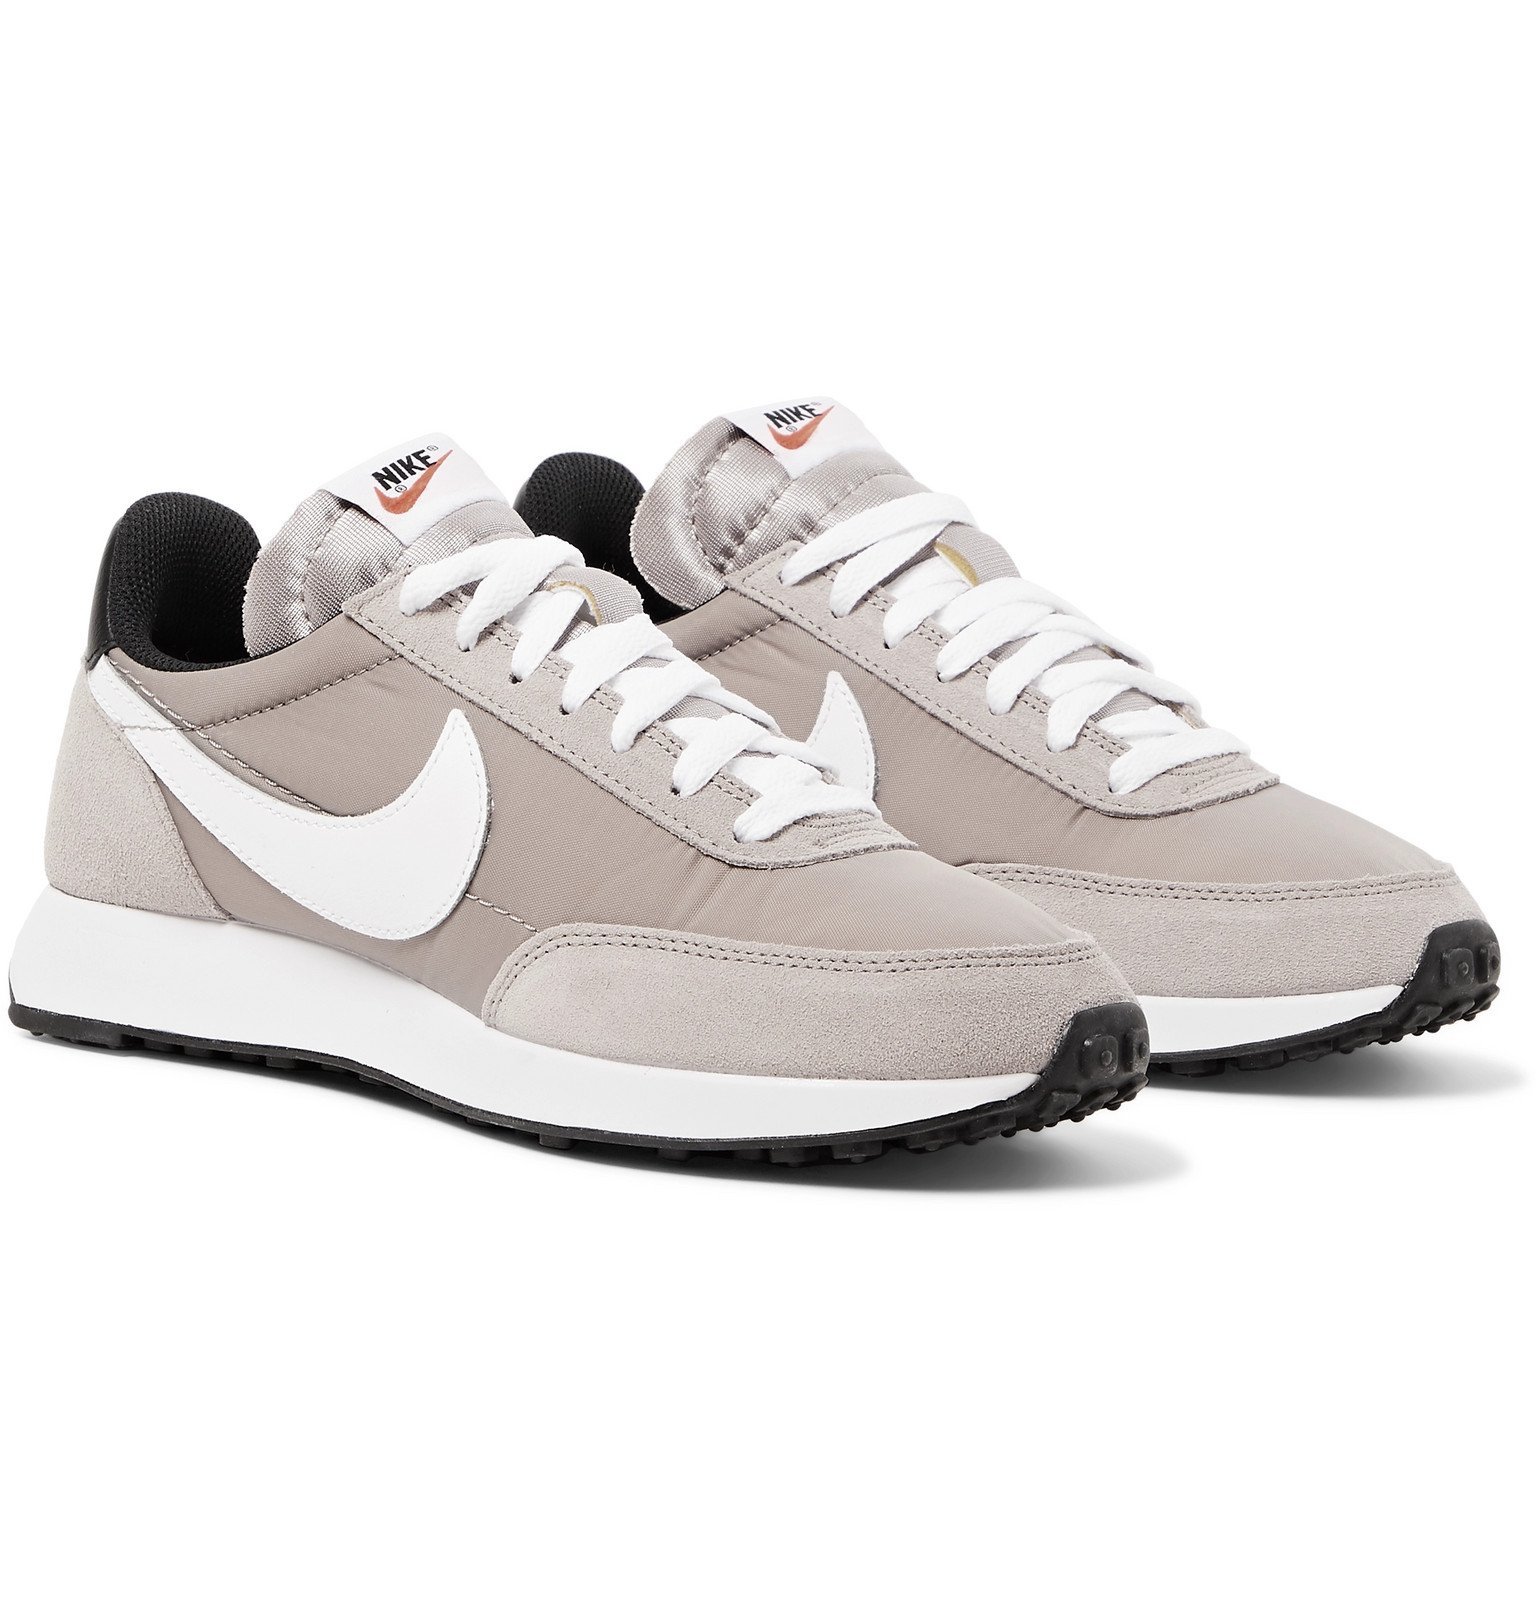 Nike - Air Tailwind 79 Shell, Suede and Leather Sneakers - Gray Nike